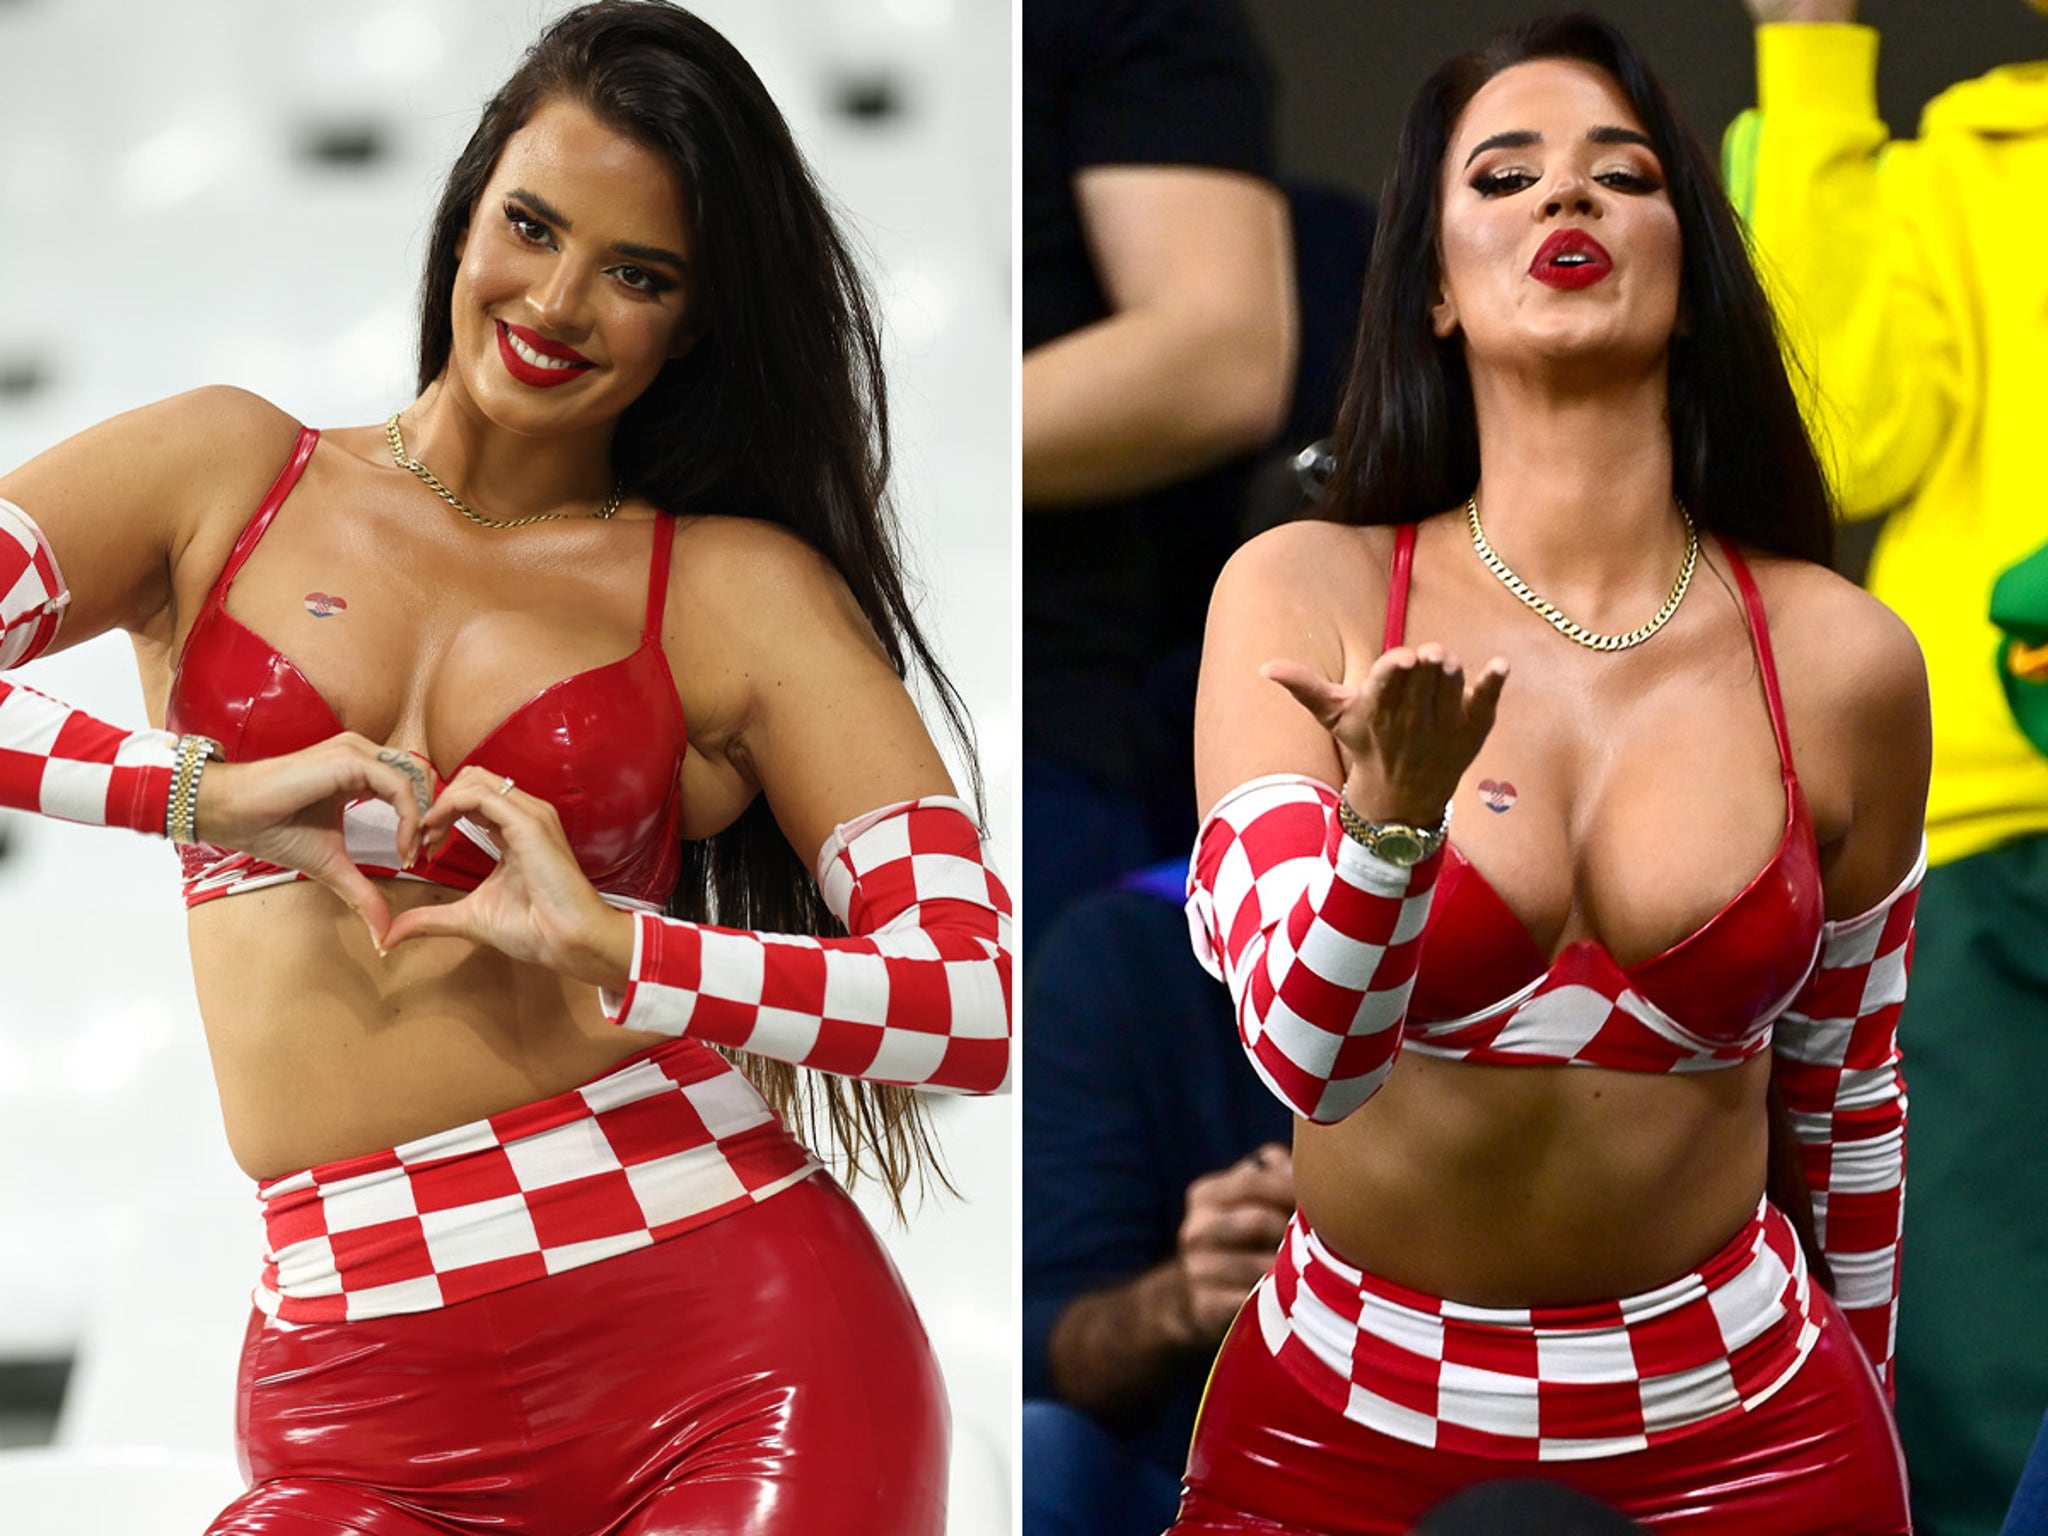 Crostia Mom Sex - Model Ivana Knoll Celebrates Croatia's Huge World Cup Win In Sexy Outfit